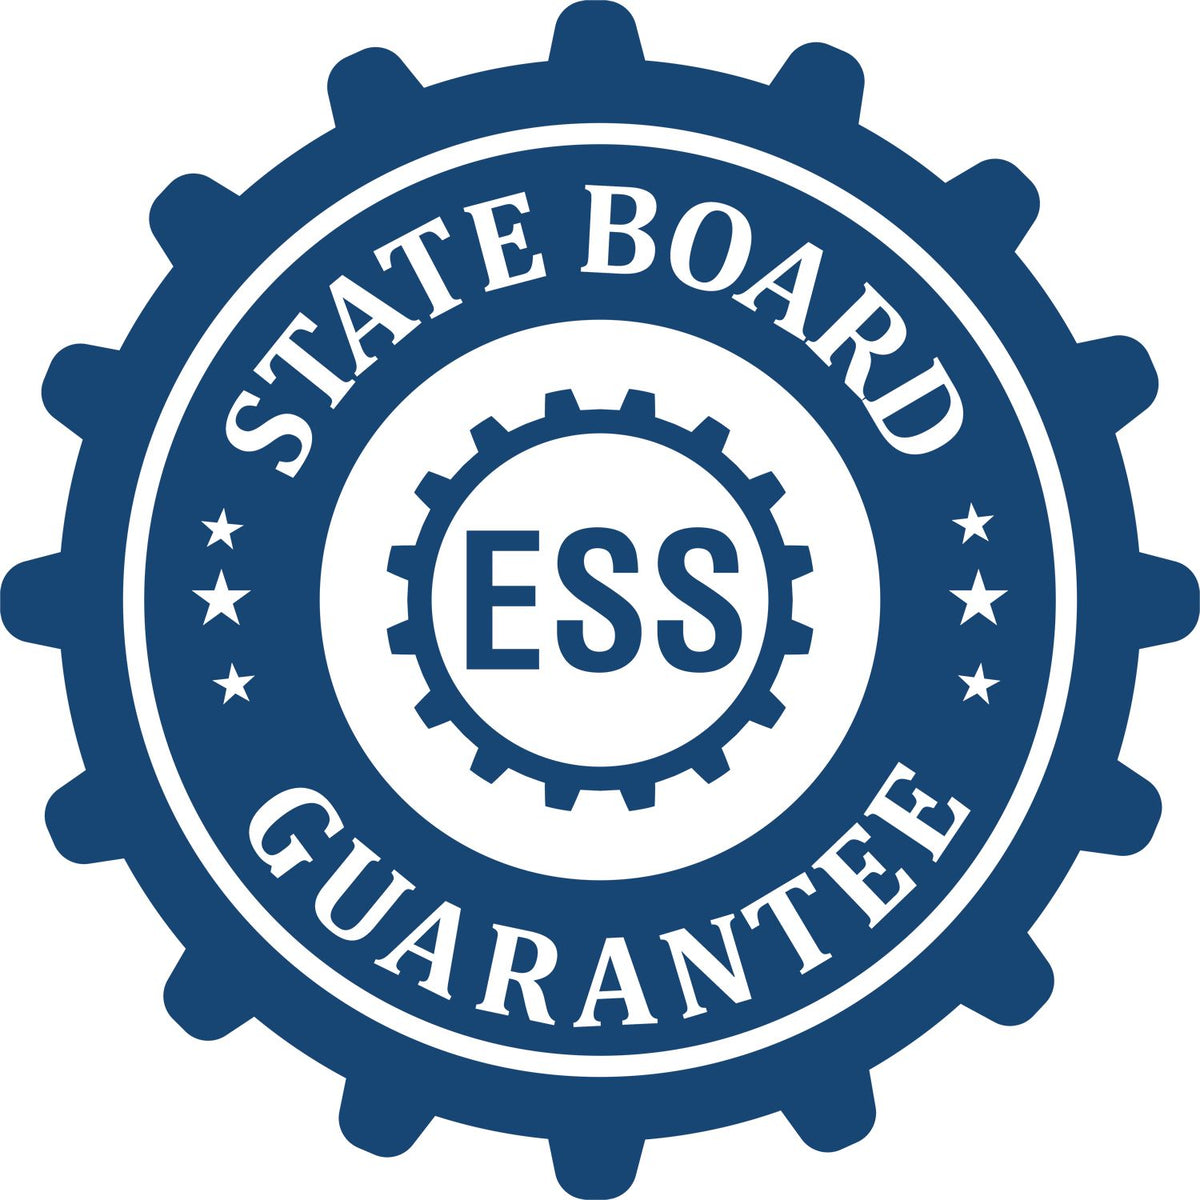 An emblem in a gear shape illustrating a state board guarantee for the South Carolina Geologist Desk Seal